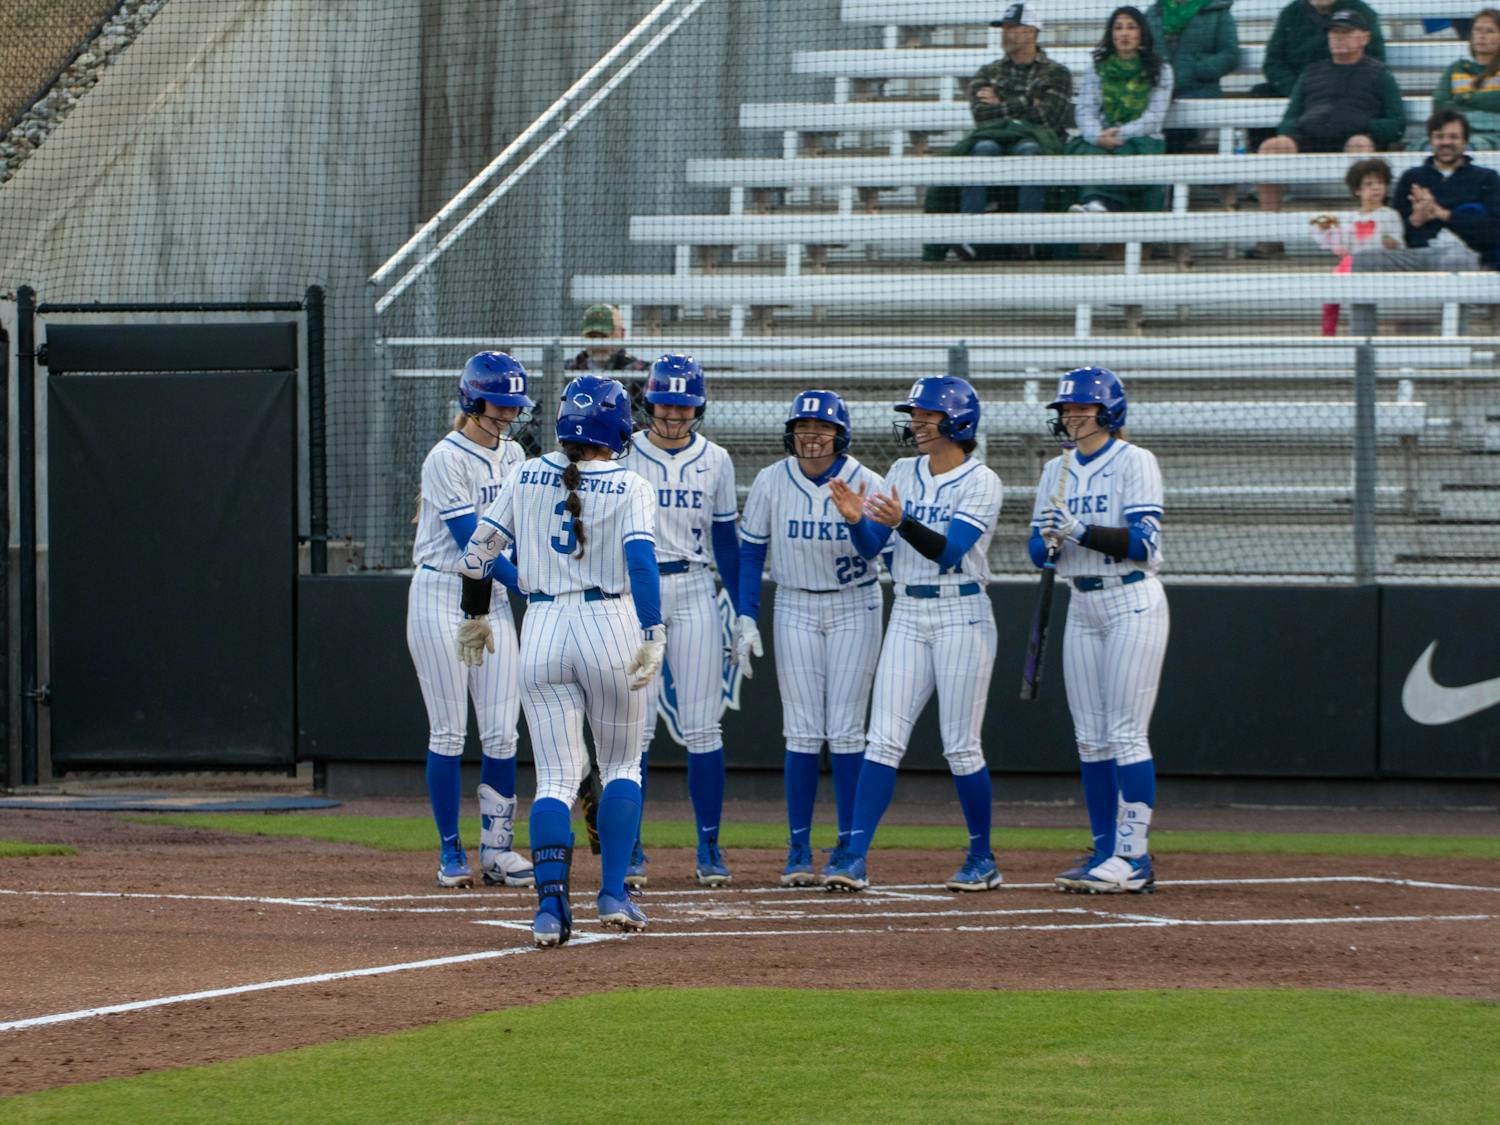 The Blue Devils bounced back from a Saturday loss to take the series Sunday.